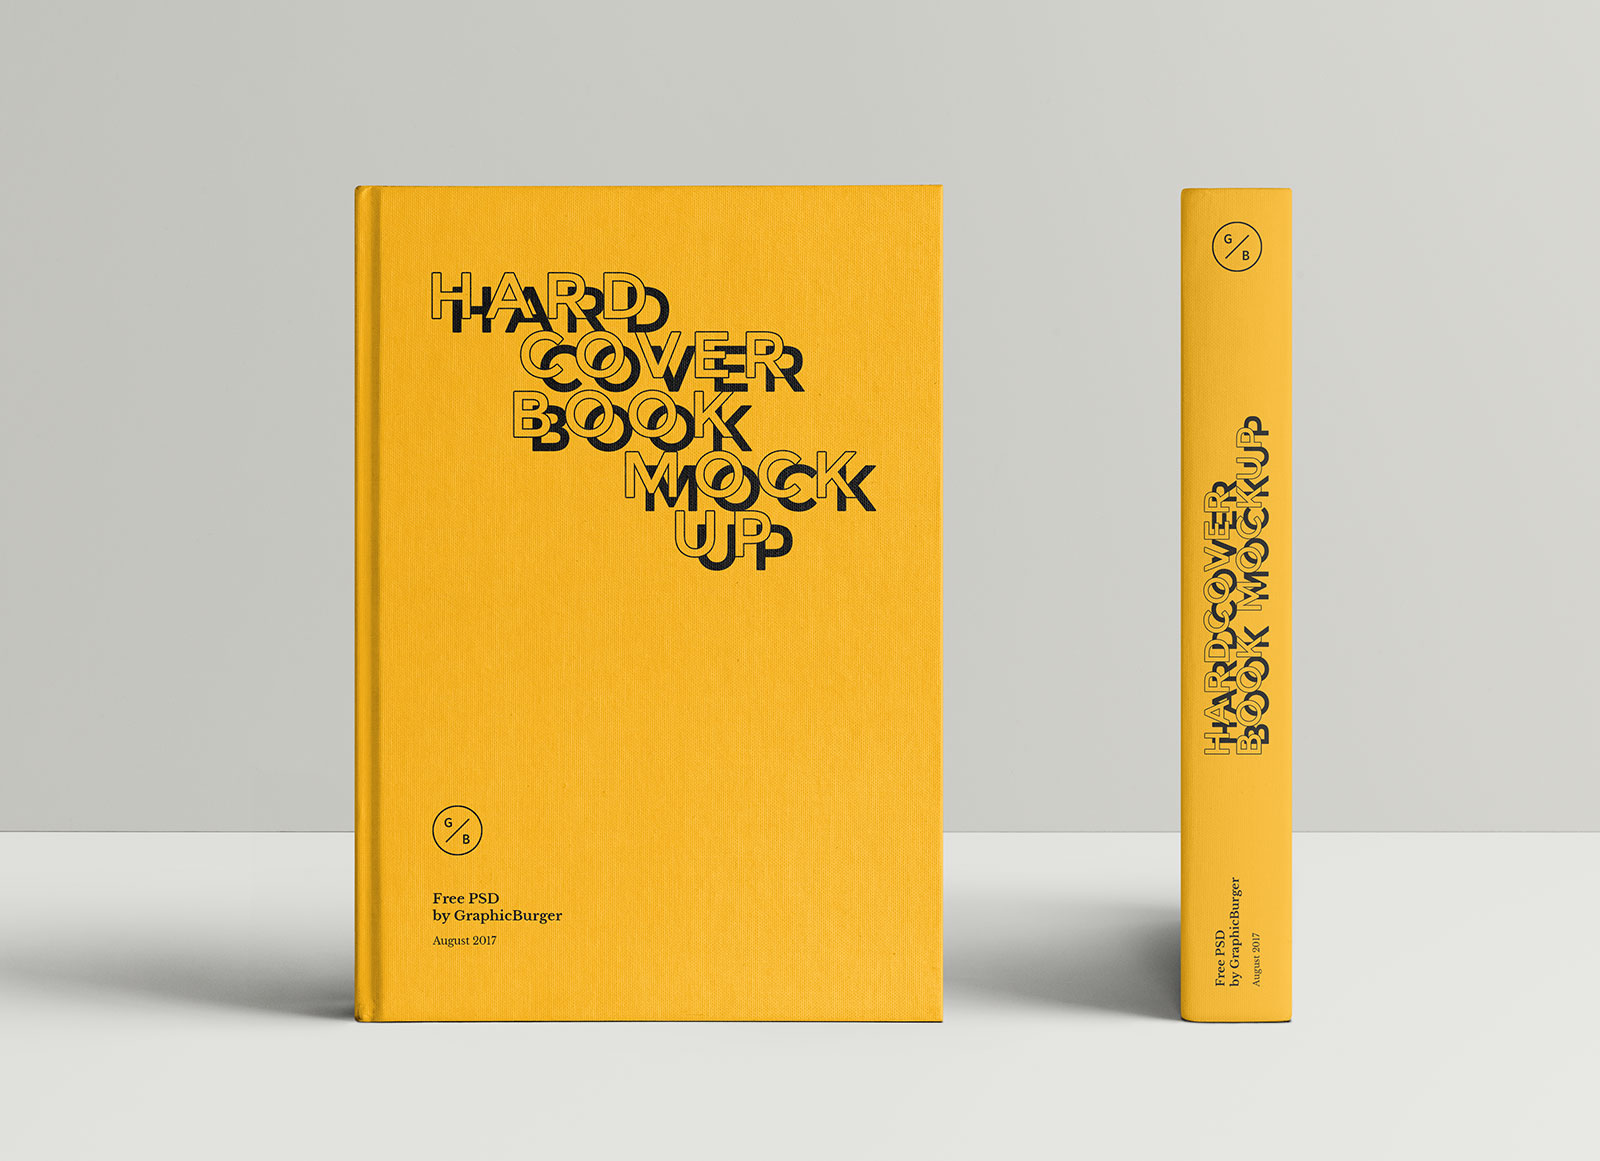 Free A5 Hardcover Book Spine Mockup PSD Template Good Mockups